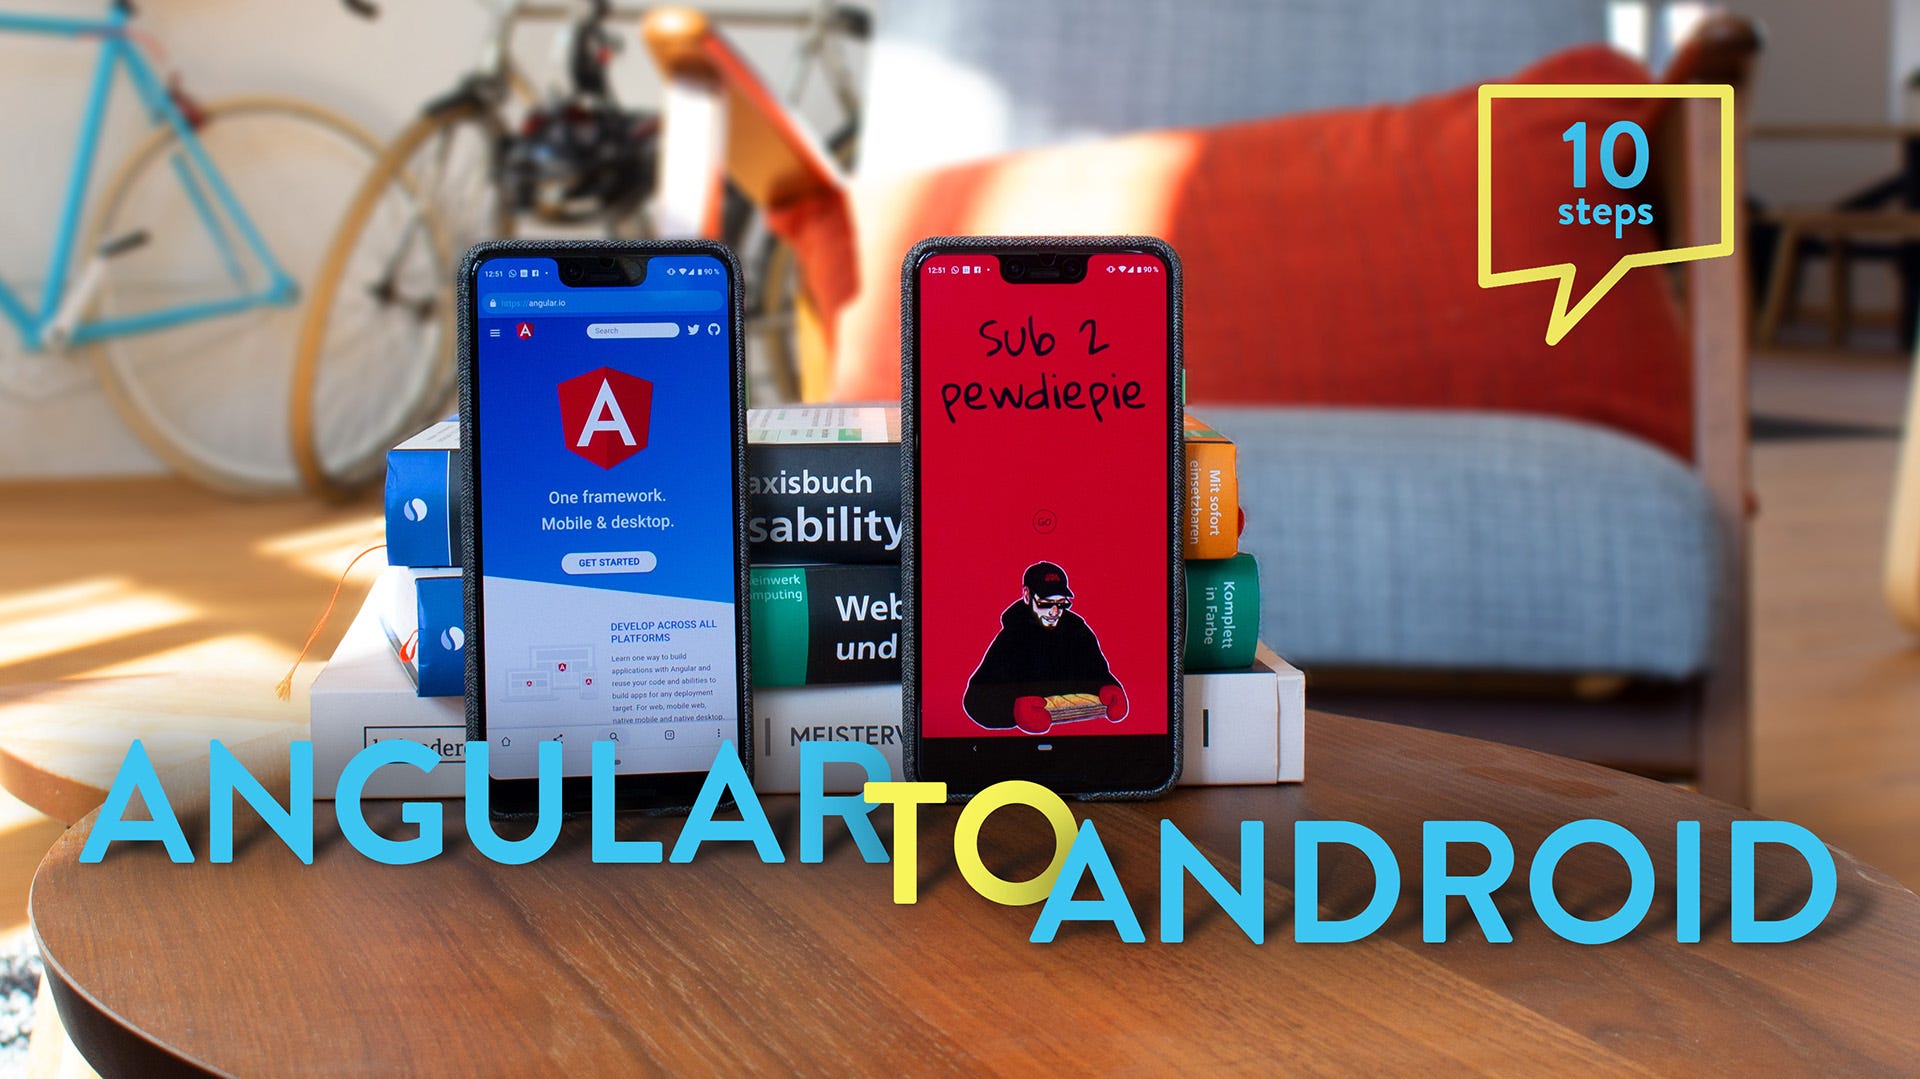 Convert Angular project to Android APK in 10 steps